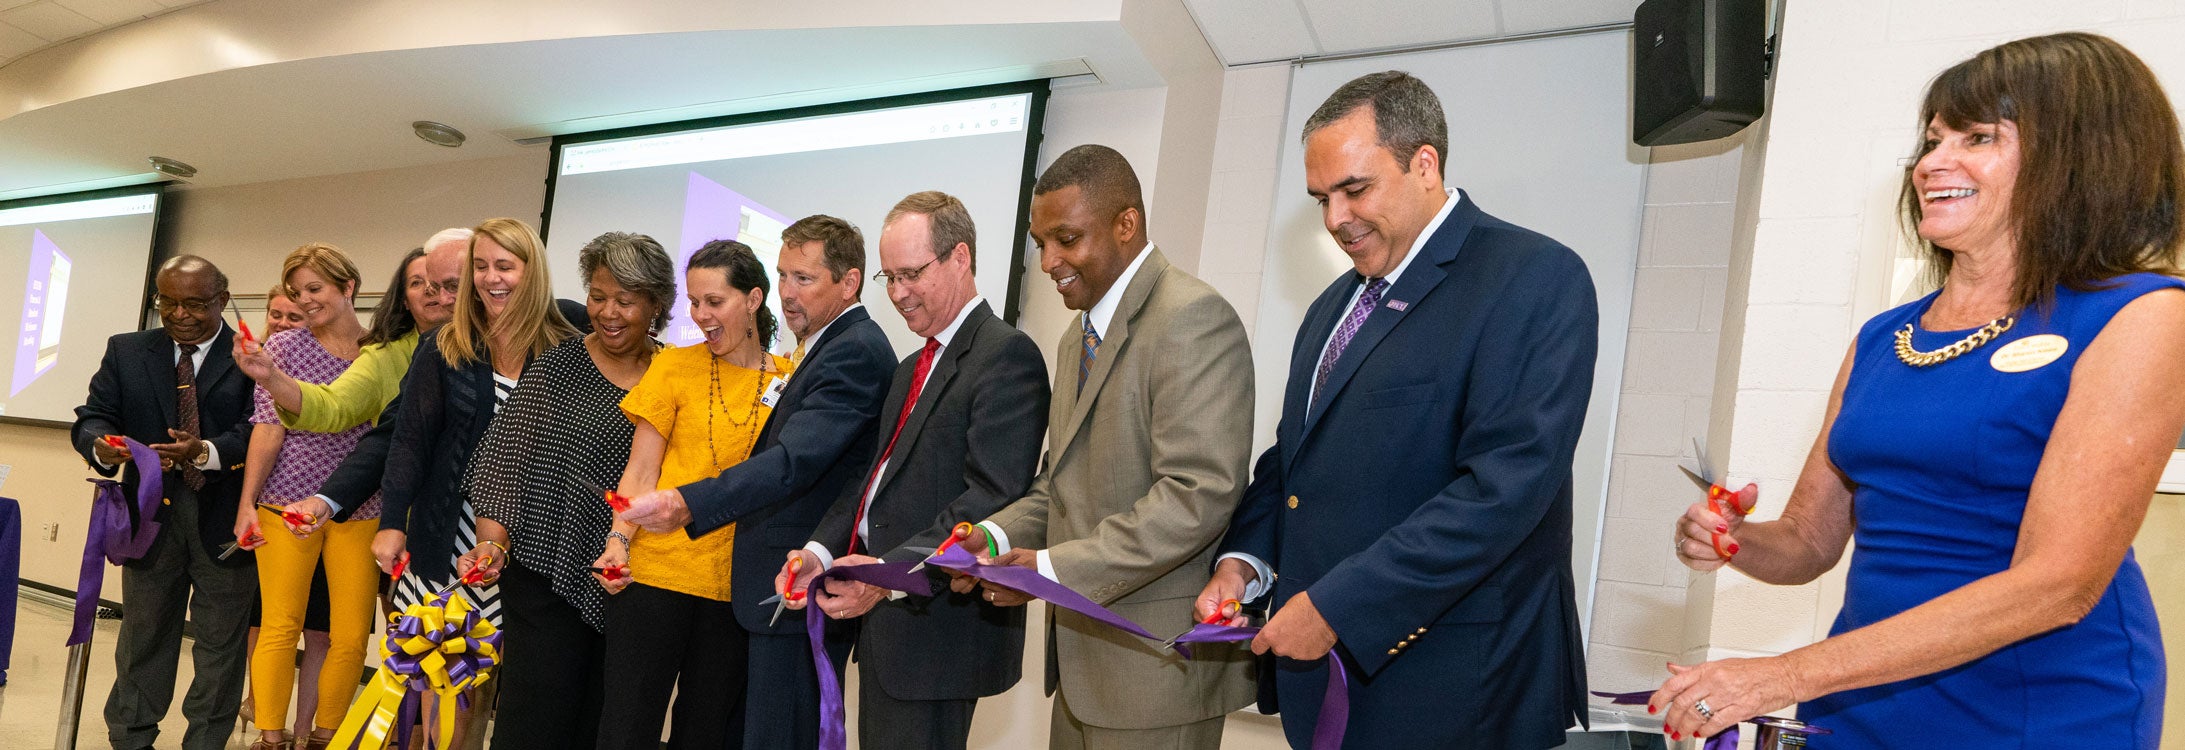 Ribbon cutting for new Innovation Early College High School